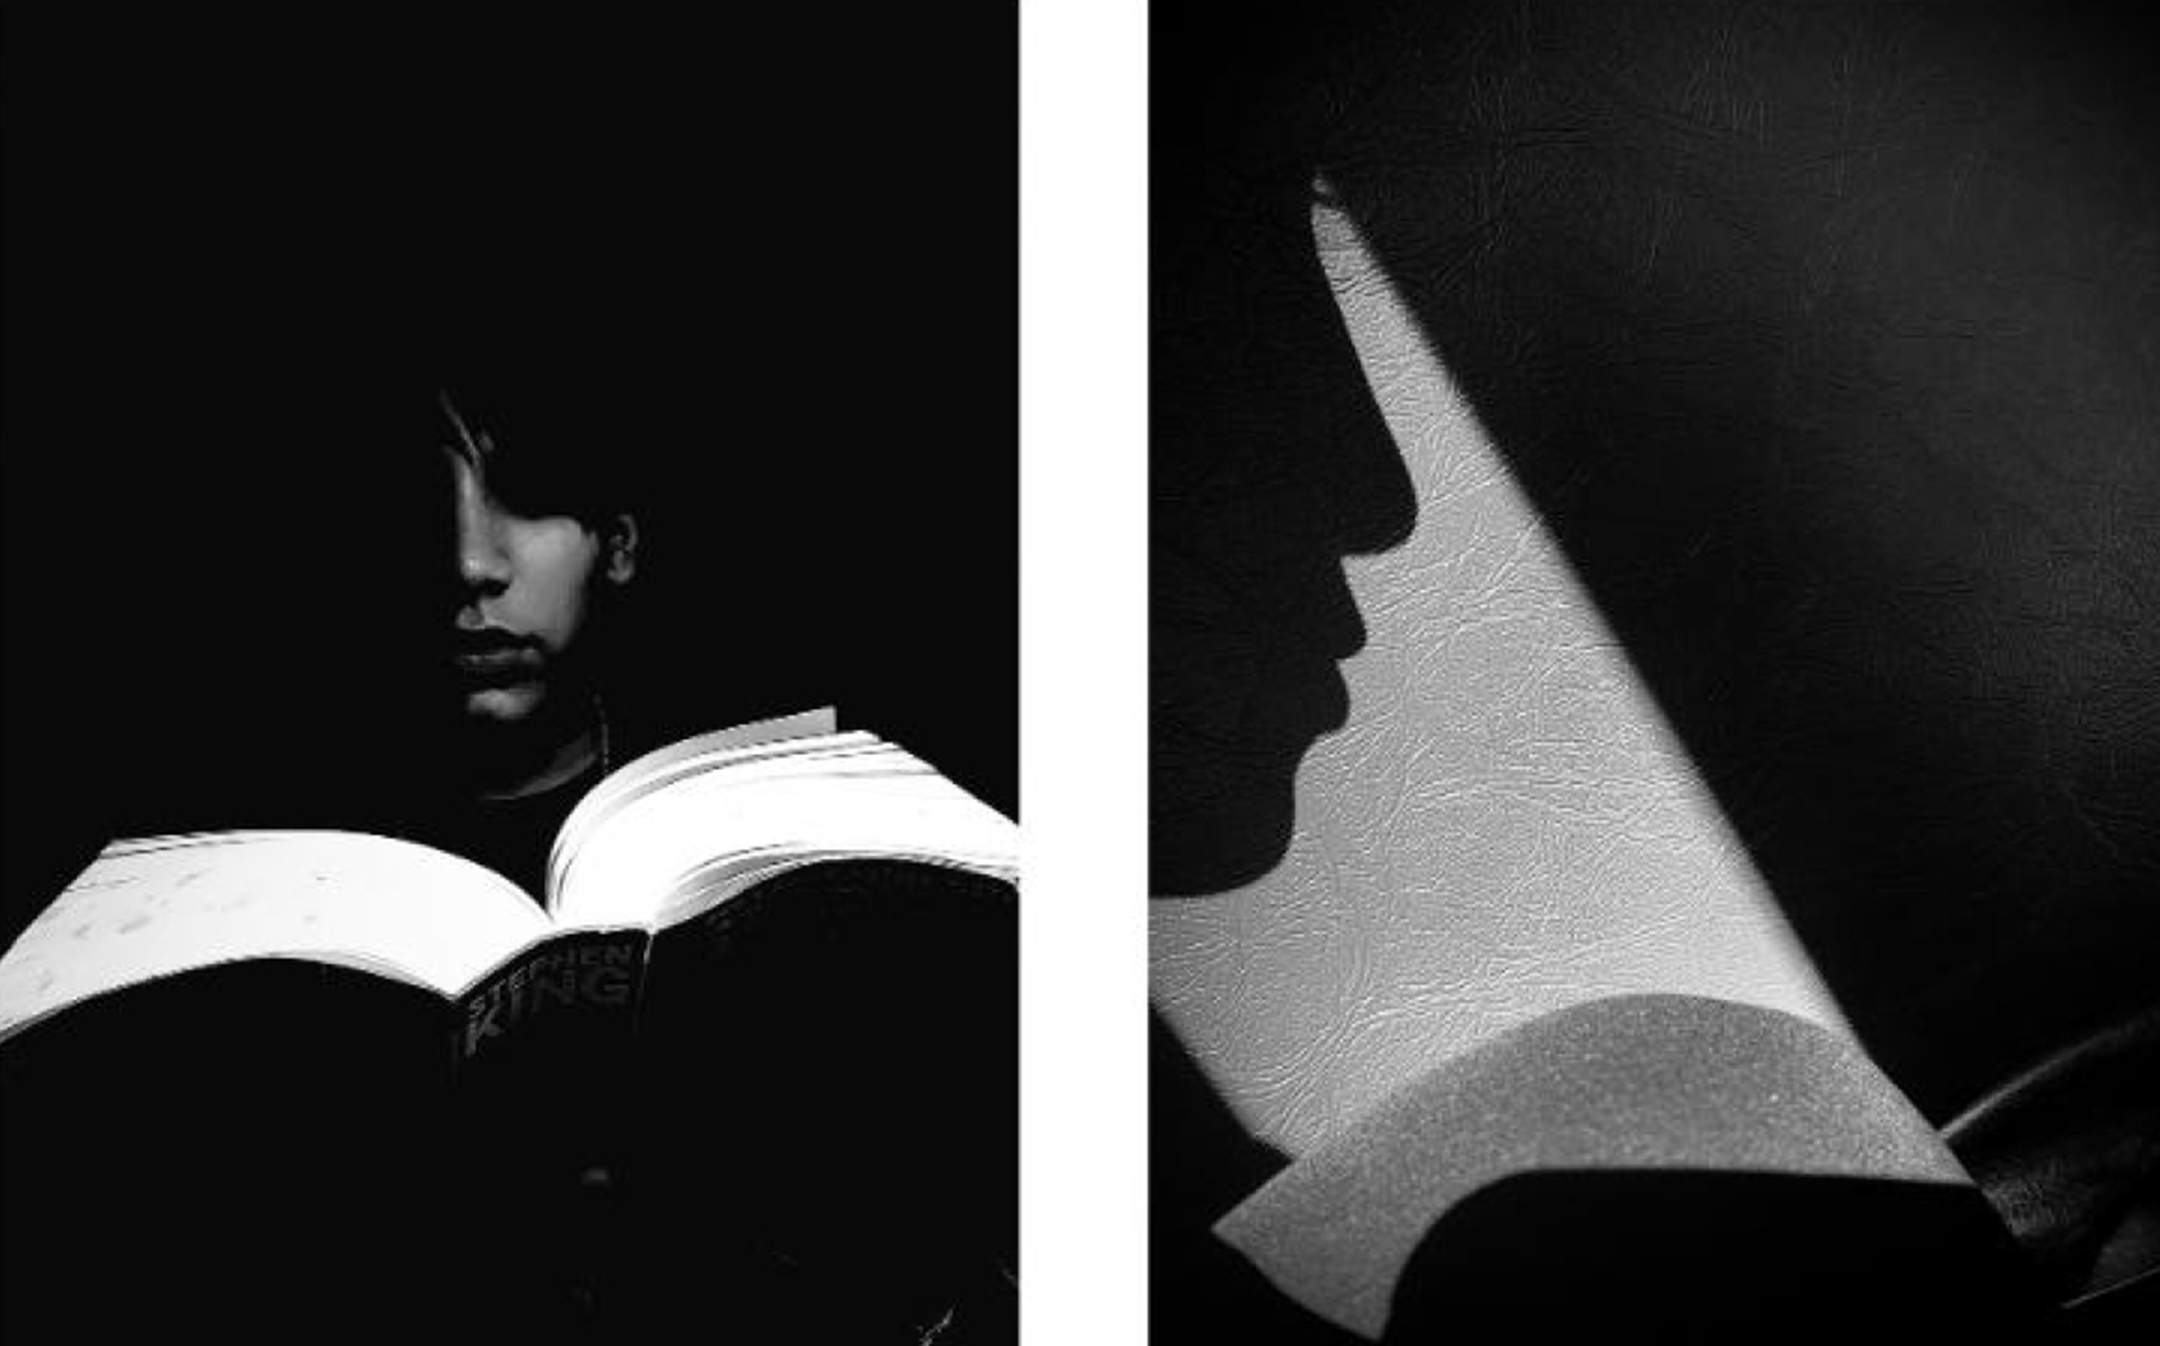 Two black and white photos, side by side, the one on the left of a young man reading a novel in darkness, the one on the right of a young person in silhouette 